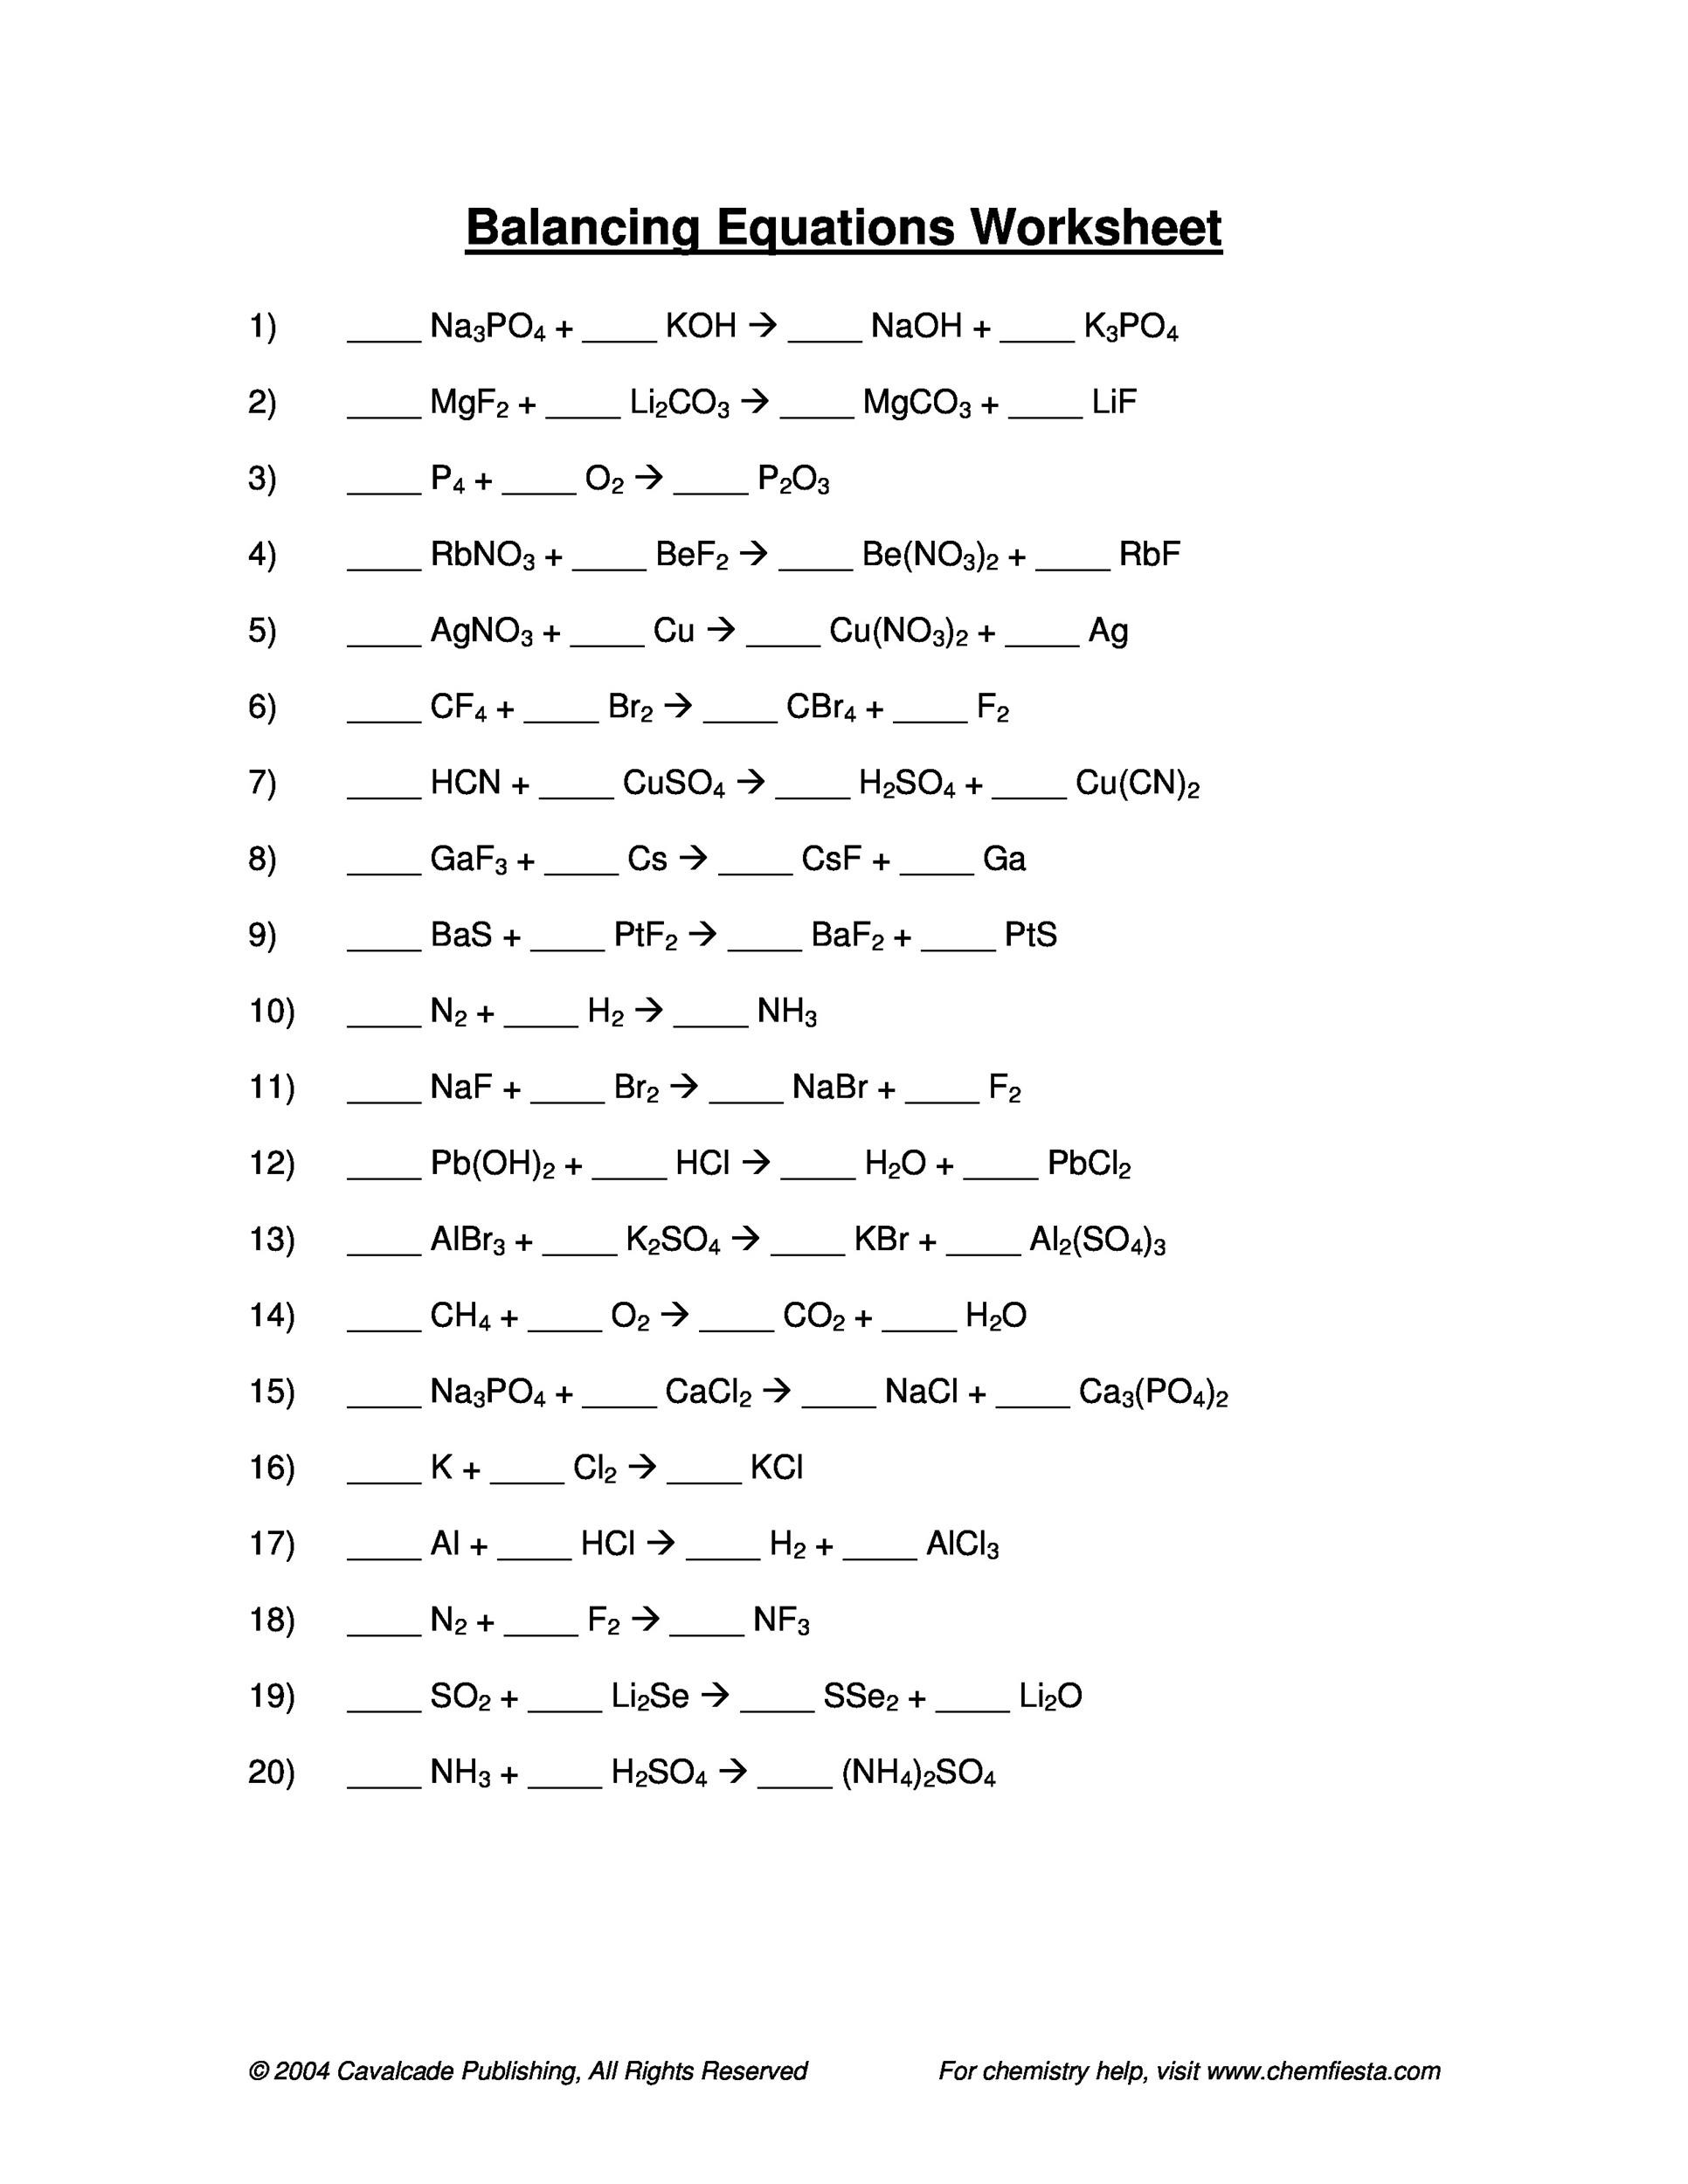 Balancing Equation Worksheet with Answers 49 Balancing Chemical Equations Worksheets [with Answers]